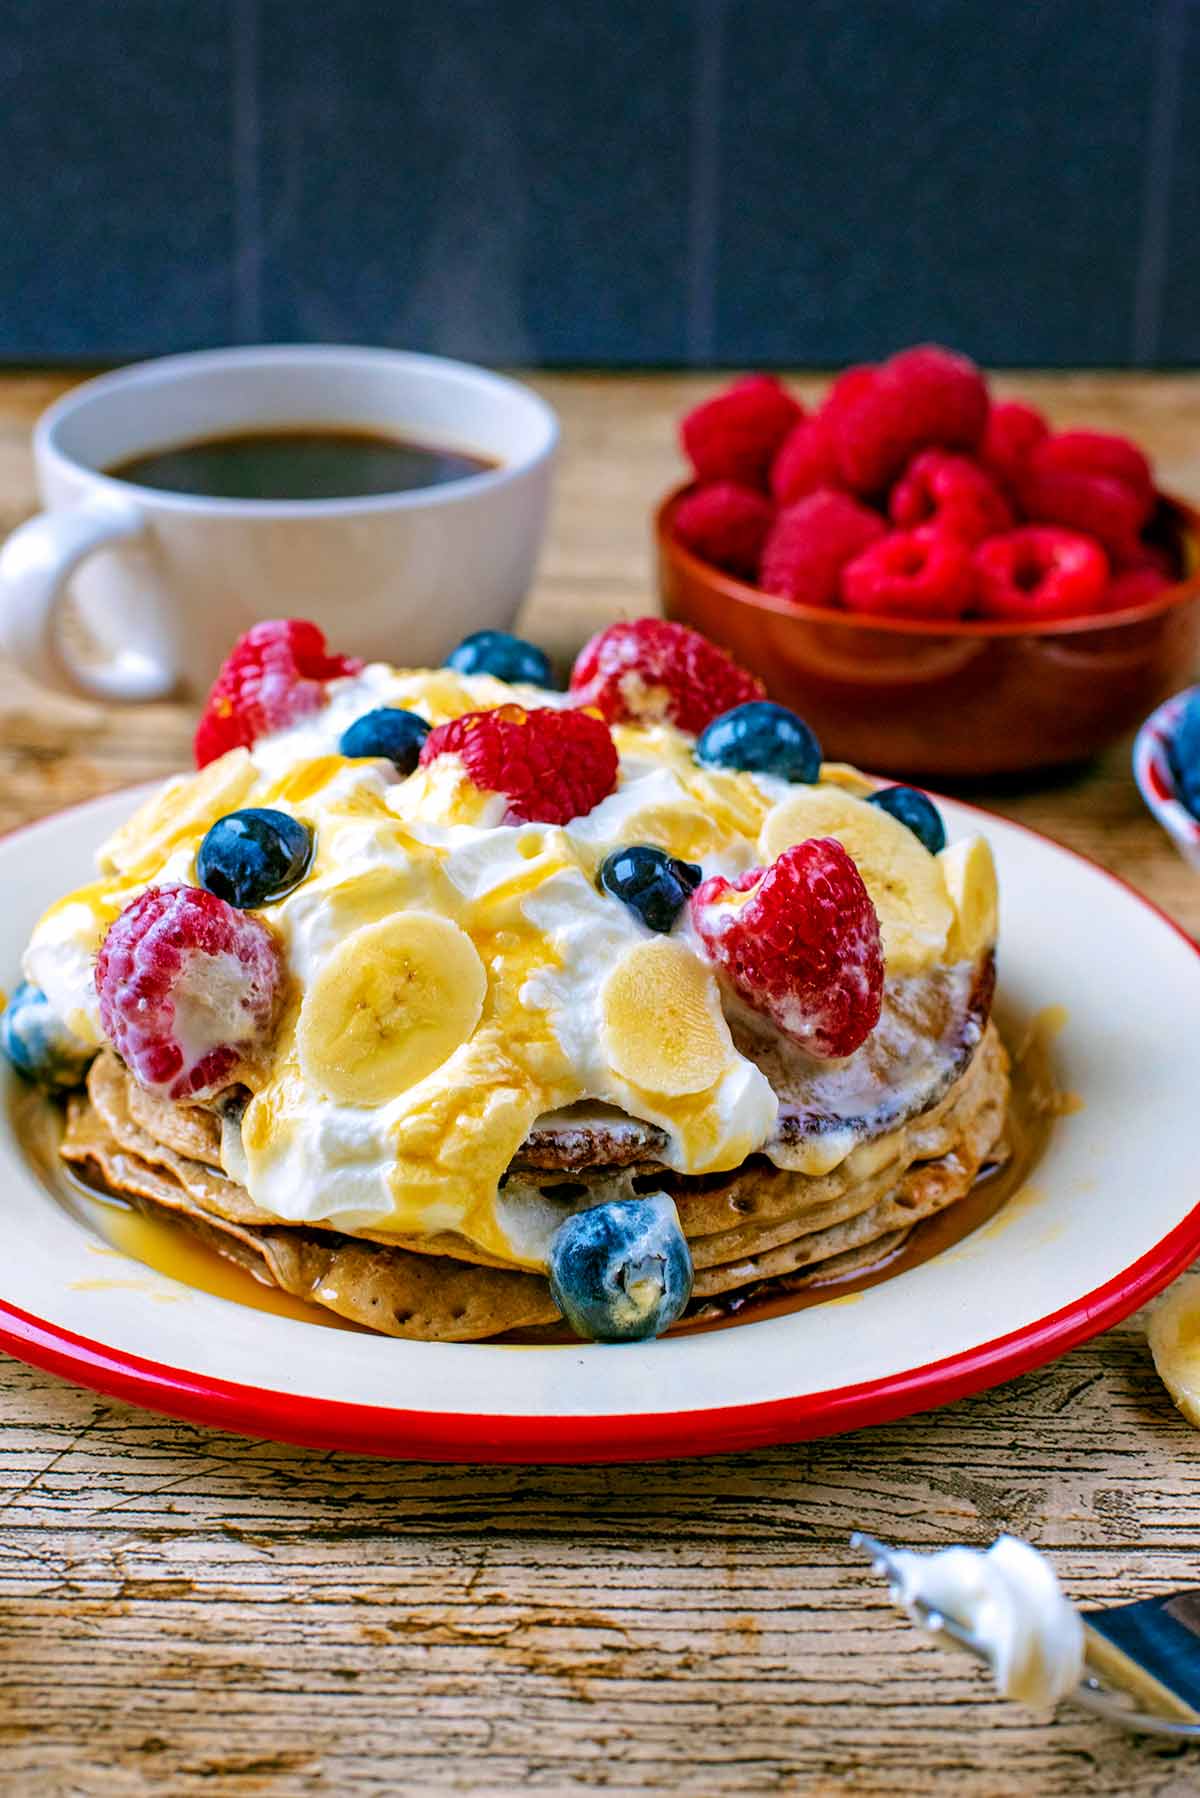 Pancakes topped with cream on a plate. A cup of coffee and raspberries in the background.